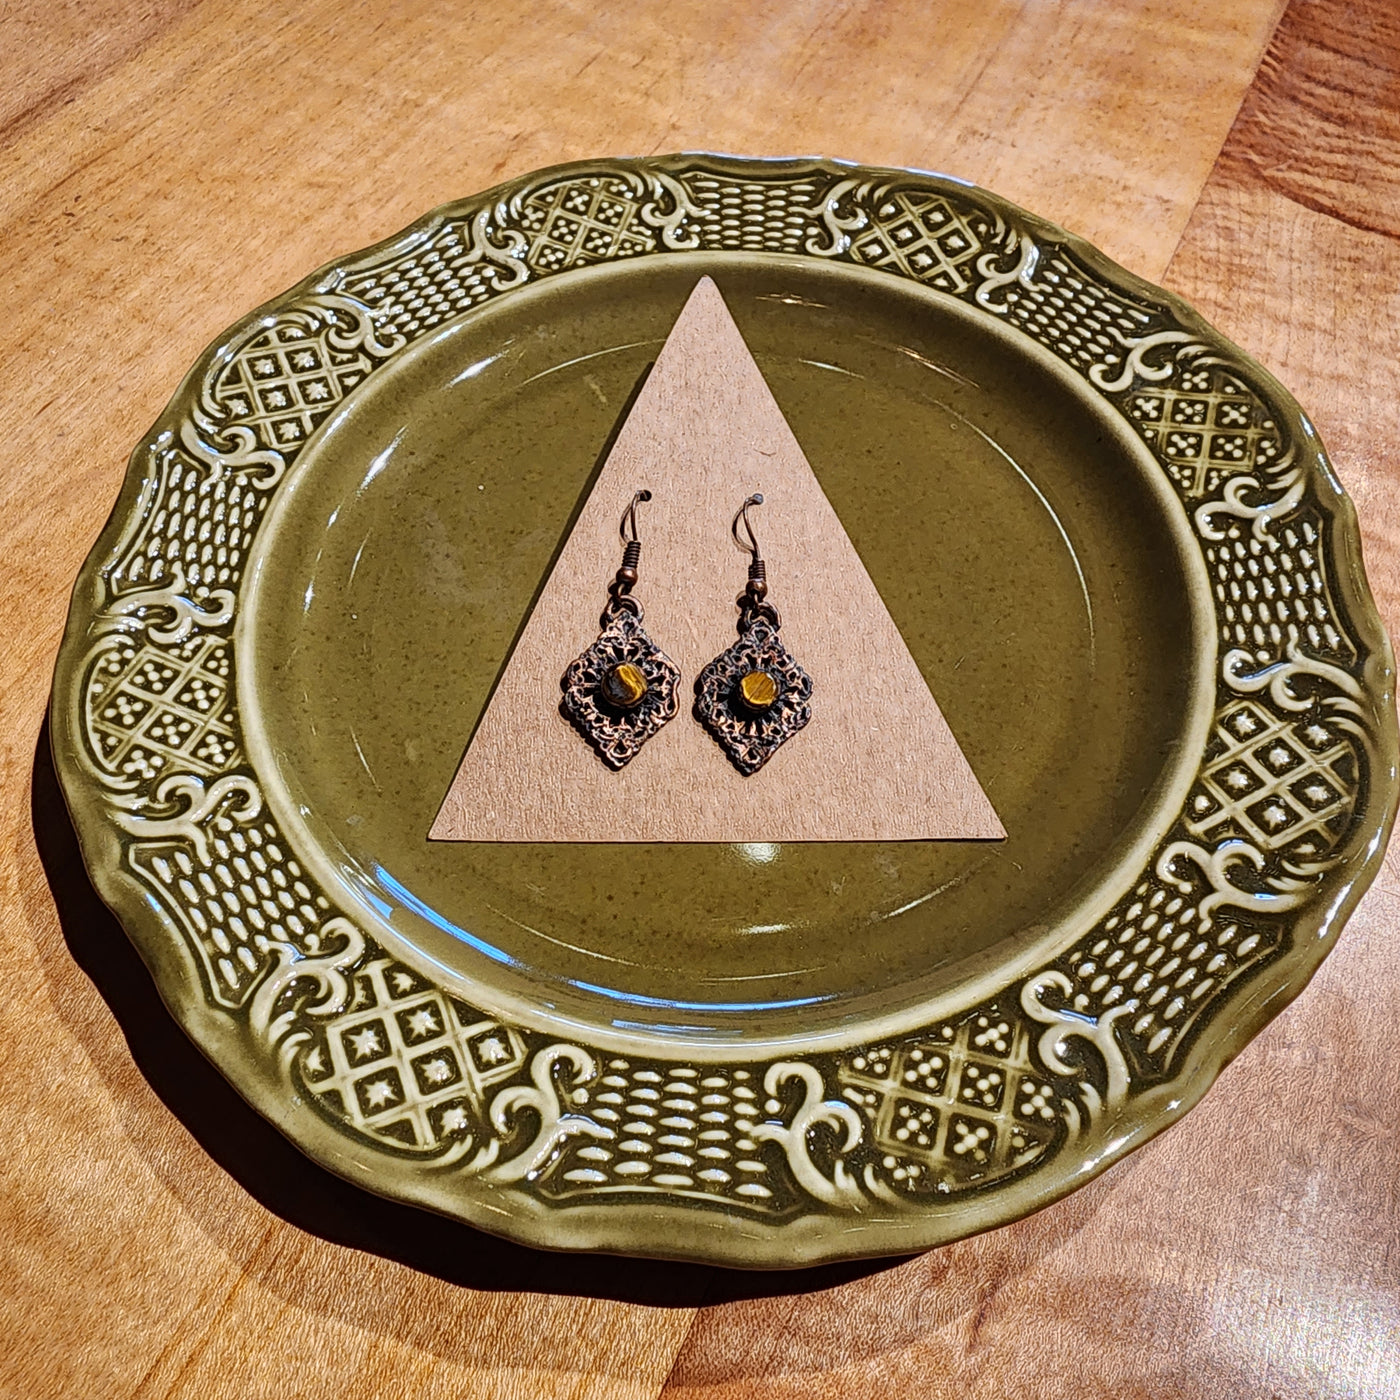 Rocks Are People Too Tiger's Eye Doily Earrings